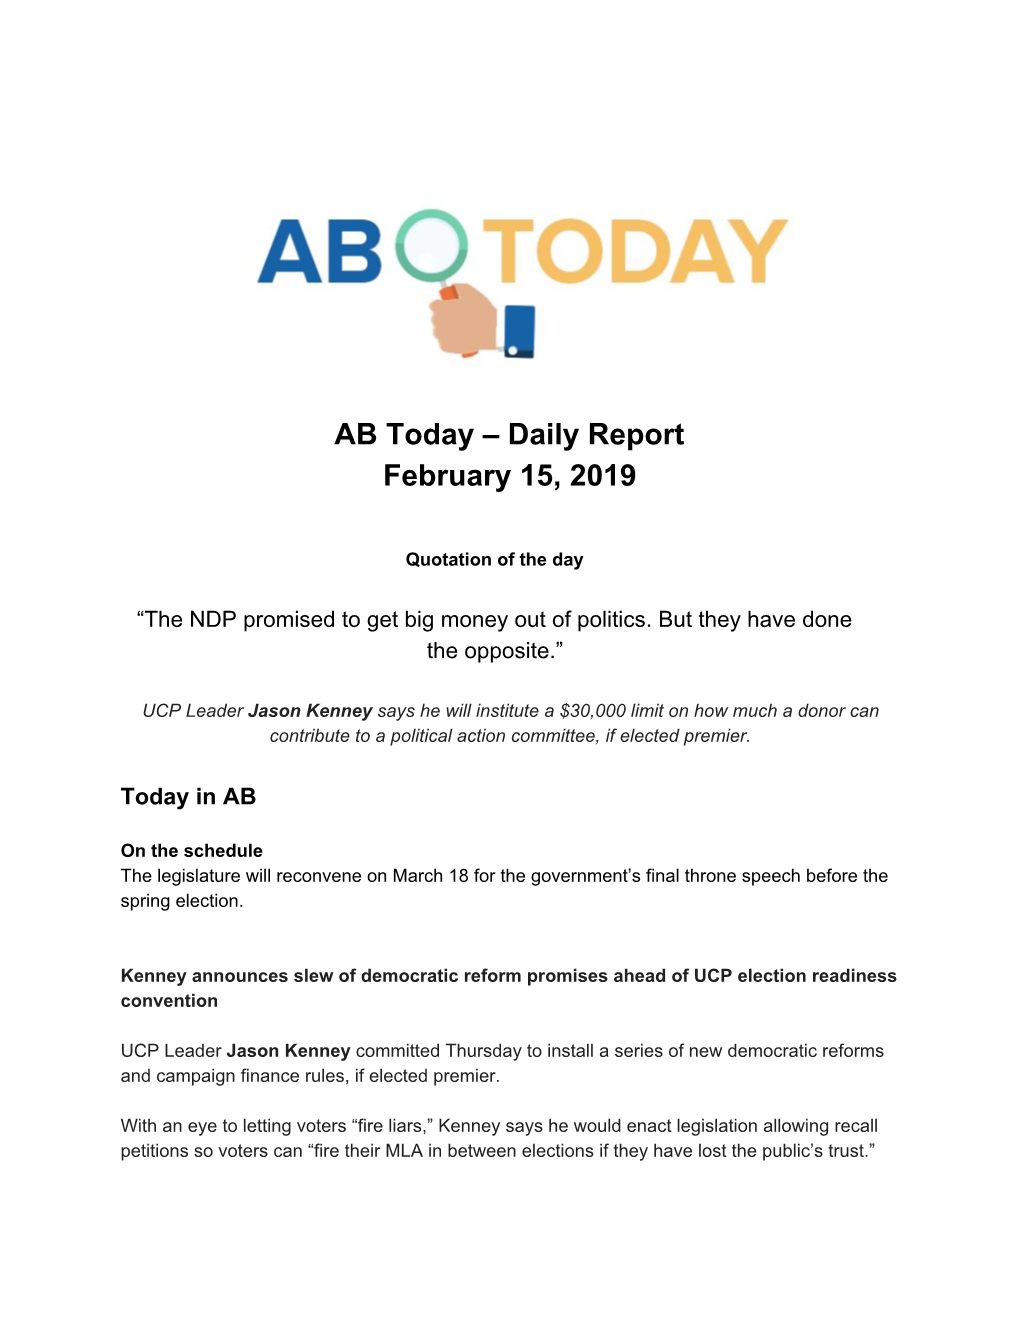 AB Today – Daily Report February 15, 2019